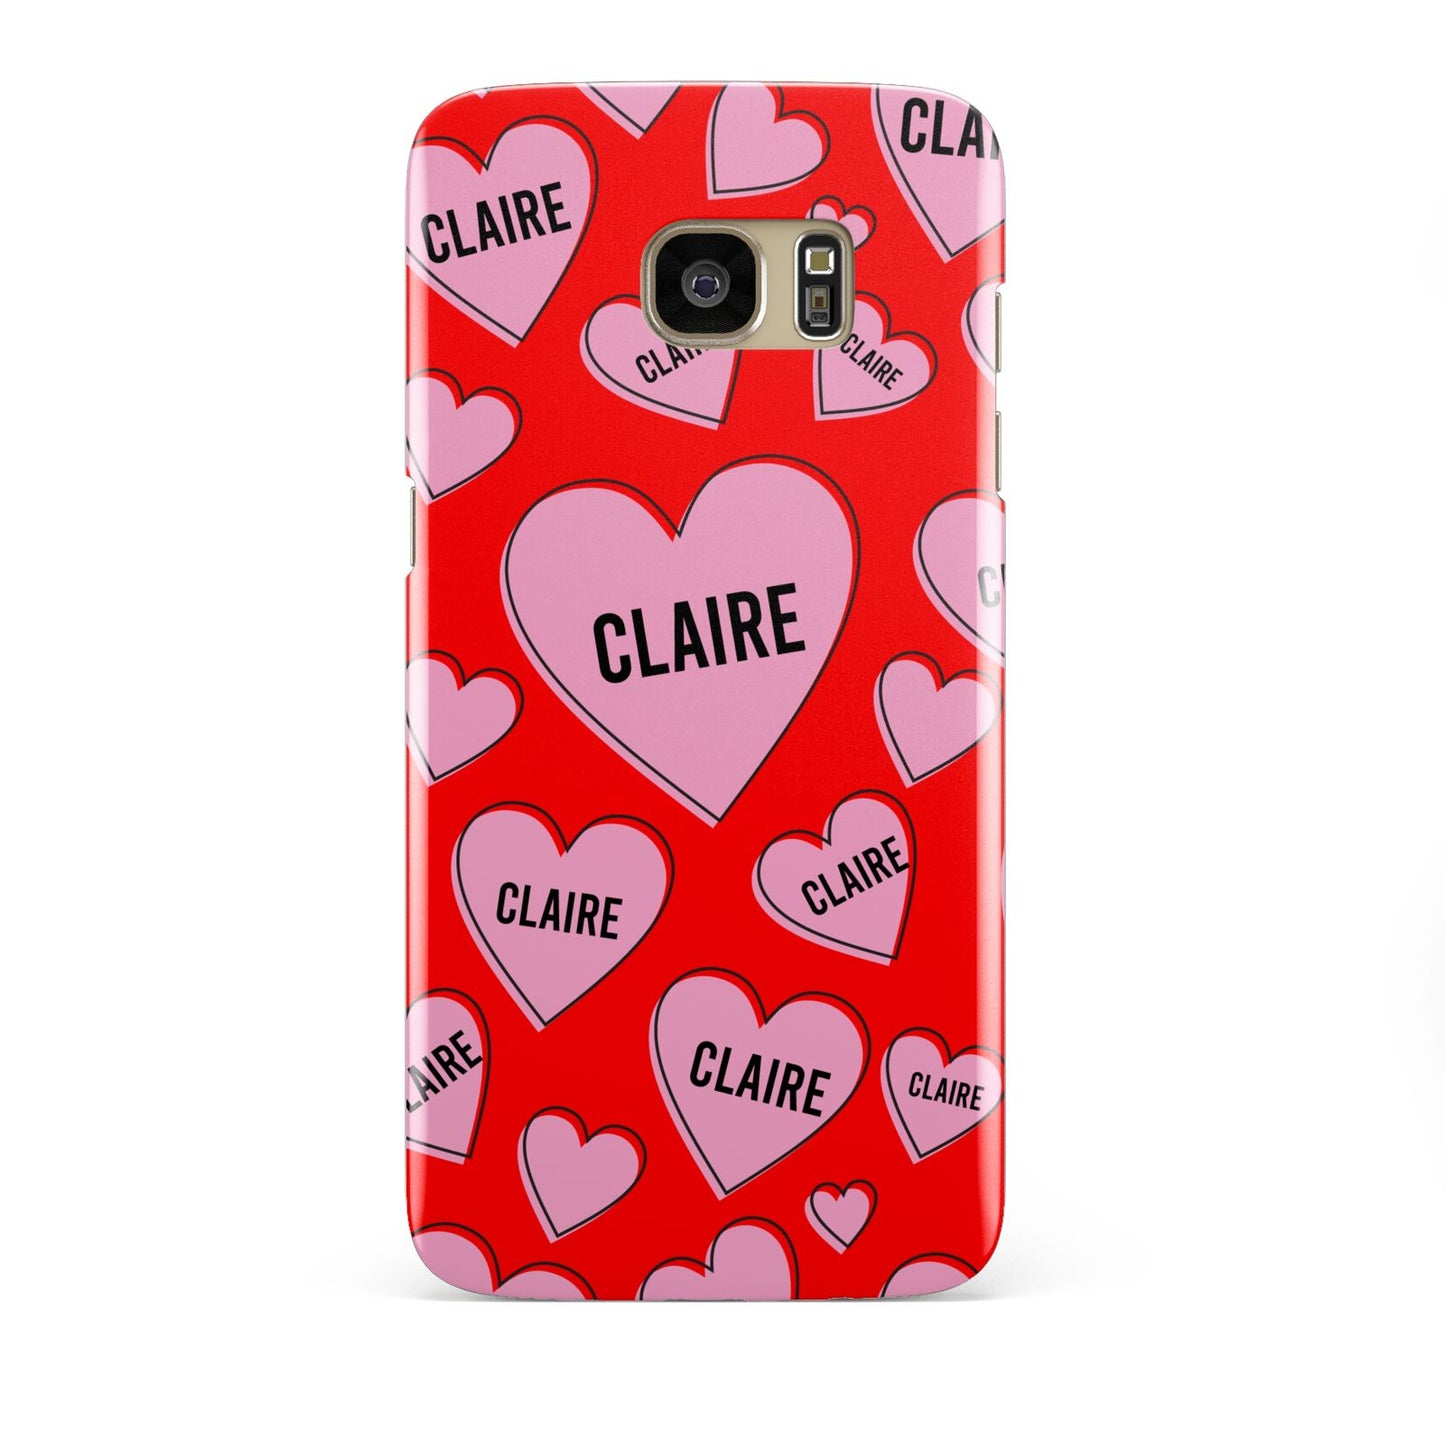 Personalised Hearts Samsung Galaxy S7 Edge Case